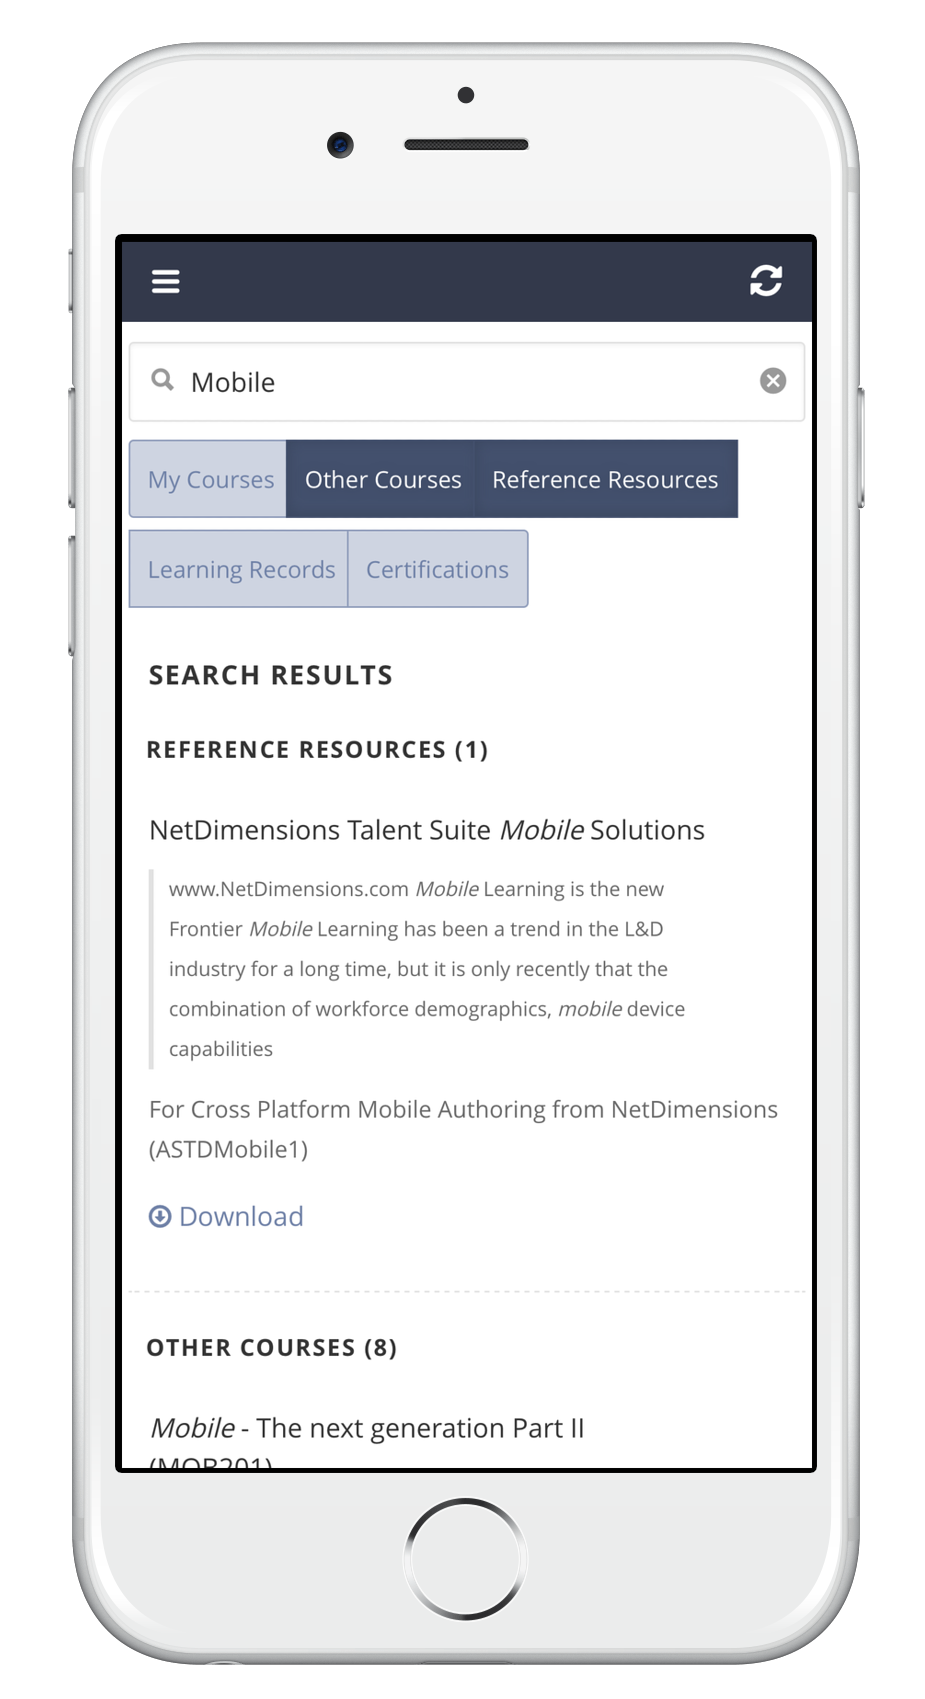 NetDimensions Talent Slate 2.5 allows mobile learning on all mobile devices including smartphones